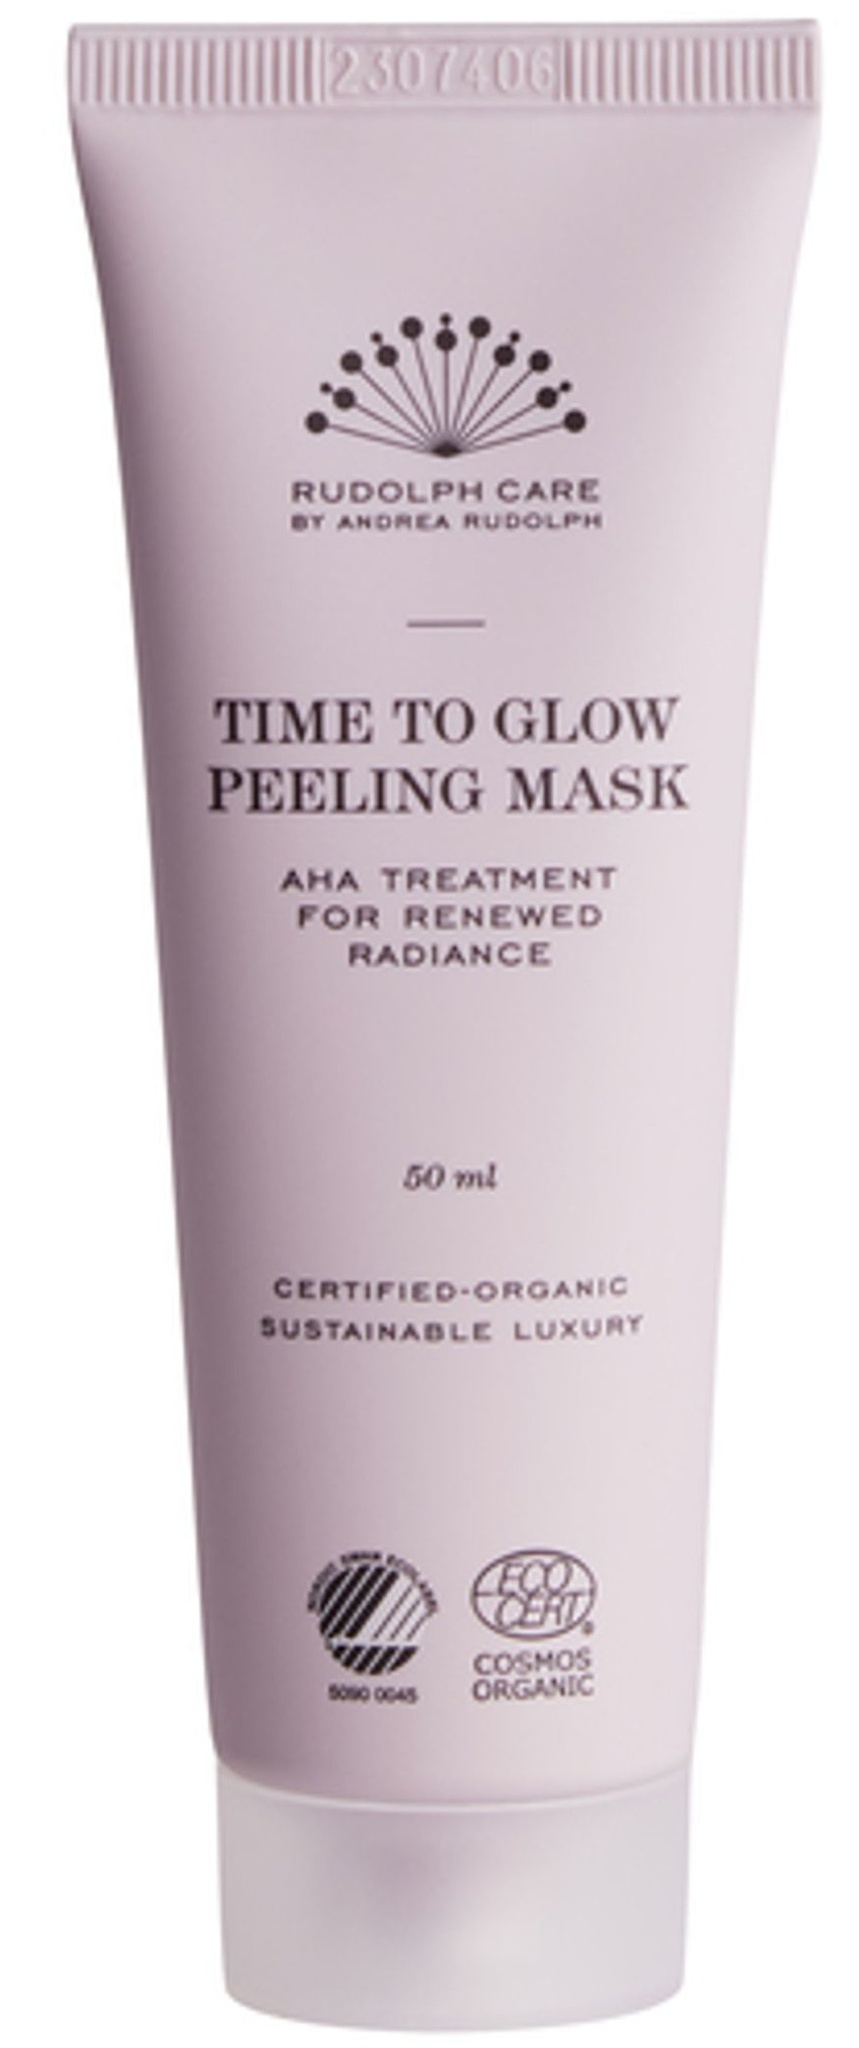 Rudolph Care Time To Glow Peeling Mask